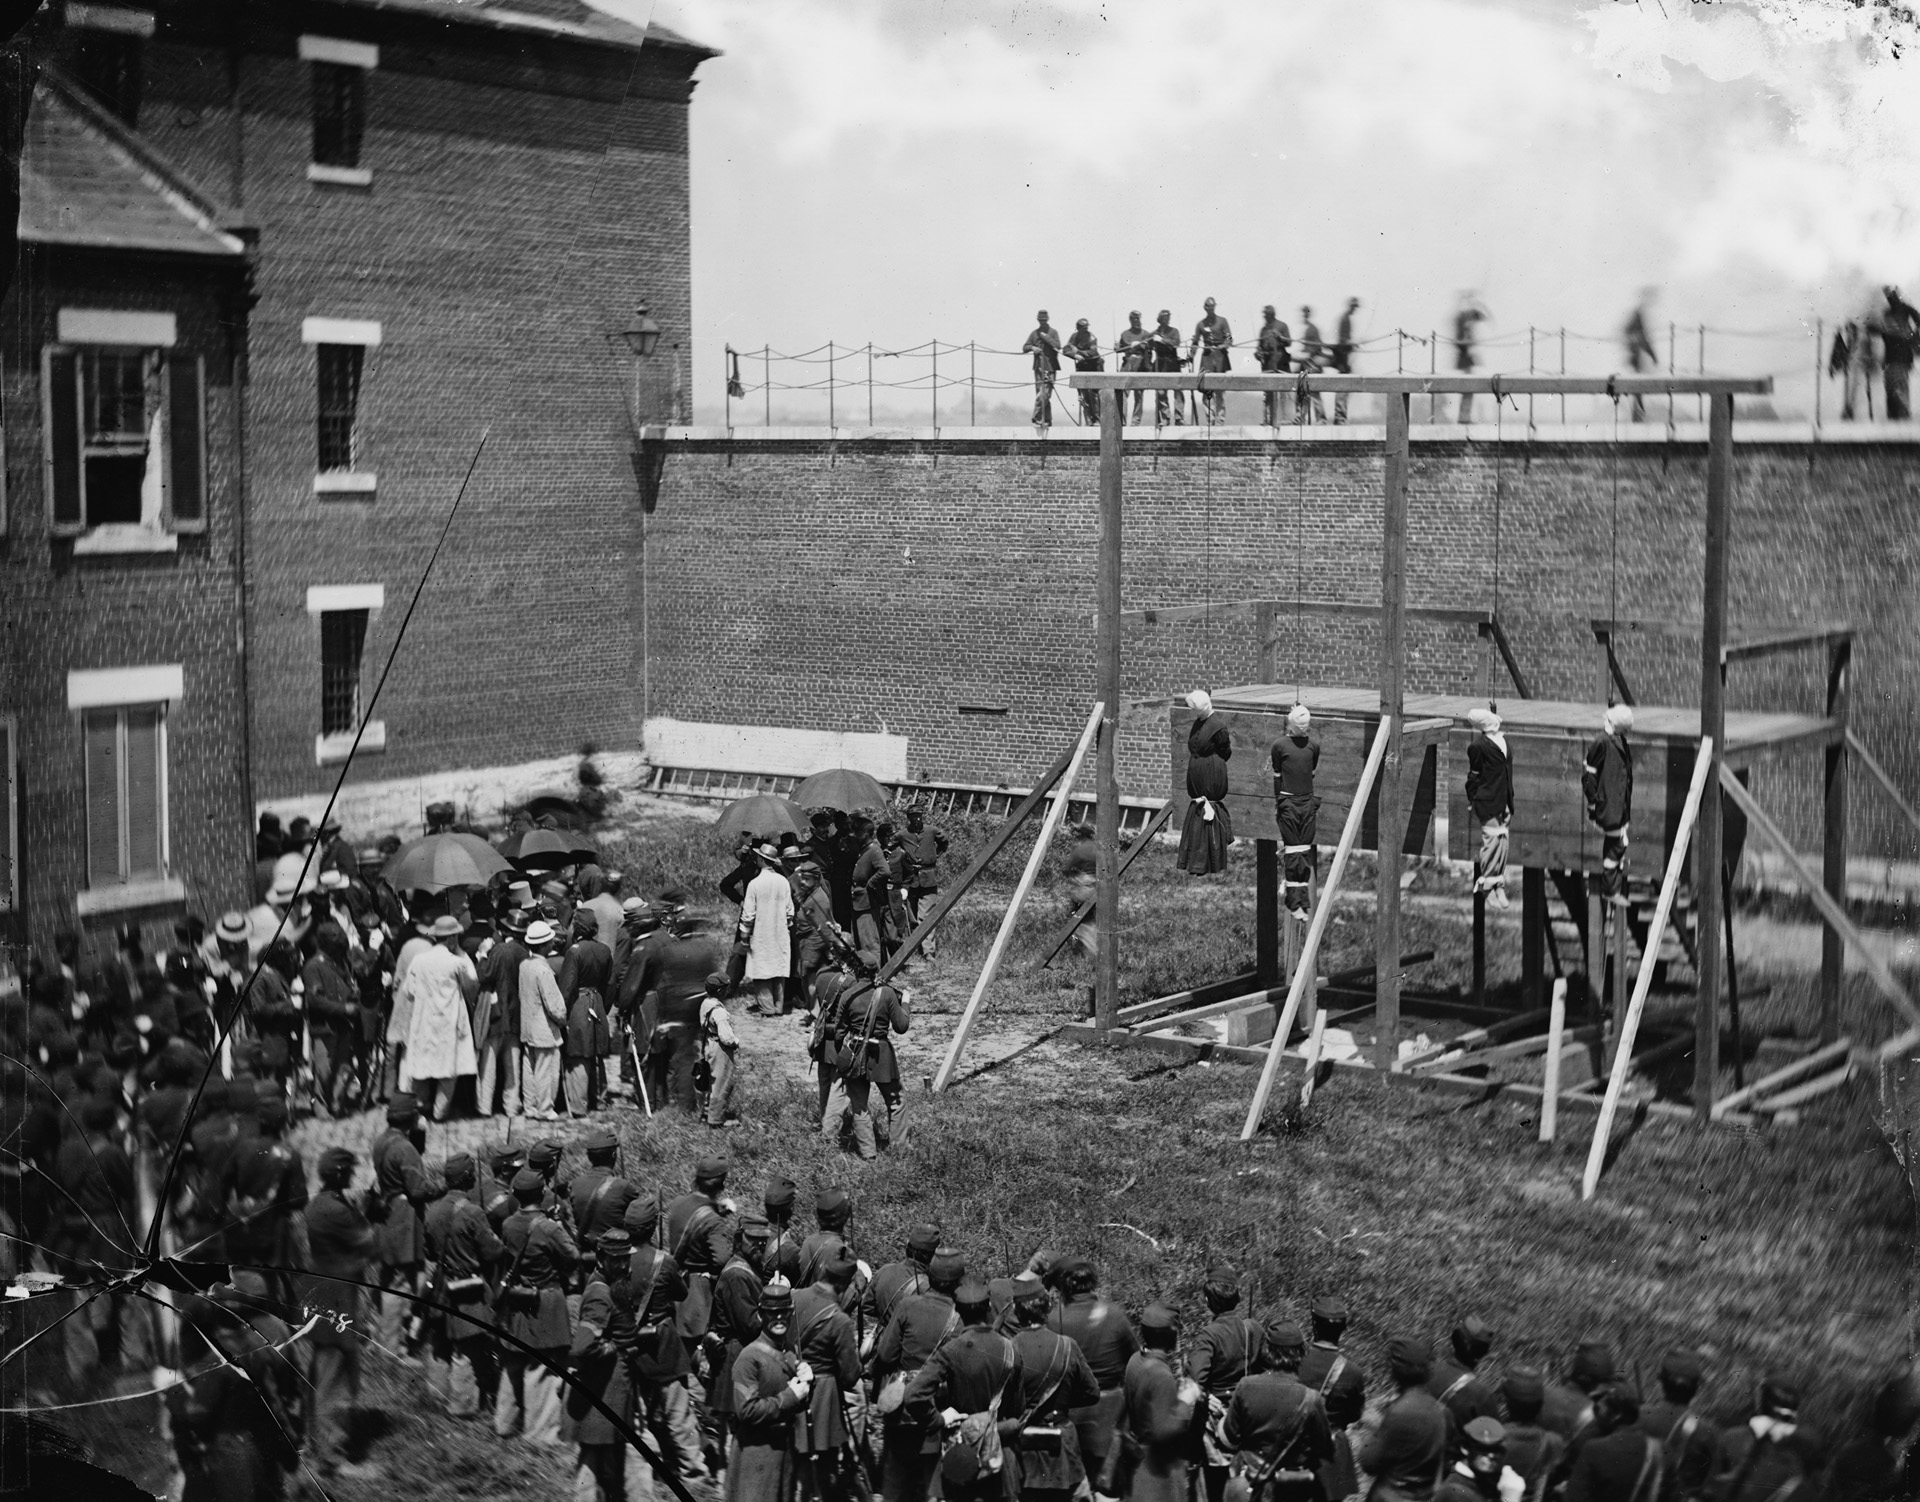 Alexander Gardner’s photo of the executed Lincoln conspirators at Washington’s Old Penitentiary on July 7, 1865. Hanging left to right with their heads covered and arms and legs bound are Mary Surratt, Lewis Paine, David Herold, and George Atzerodt.